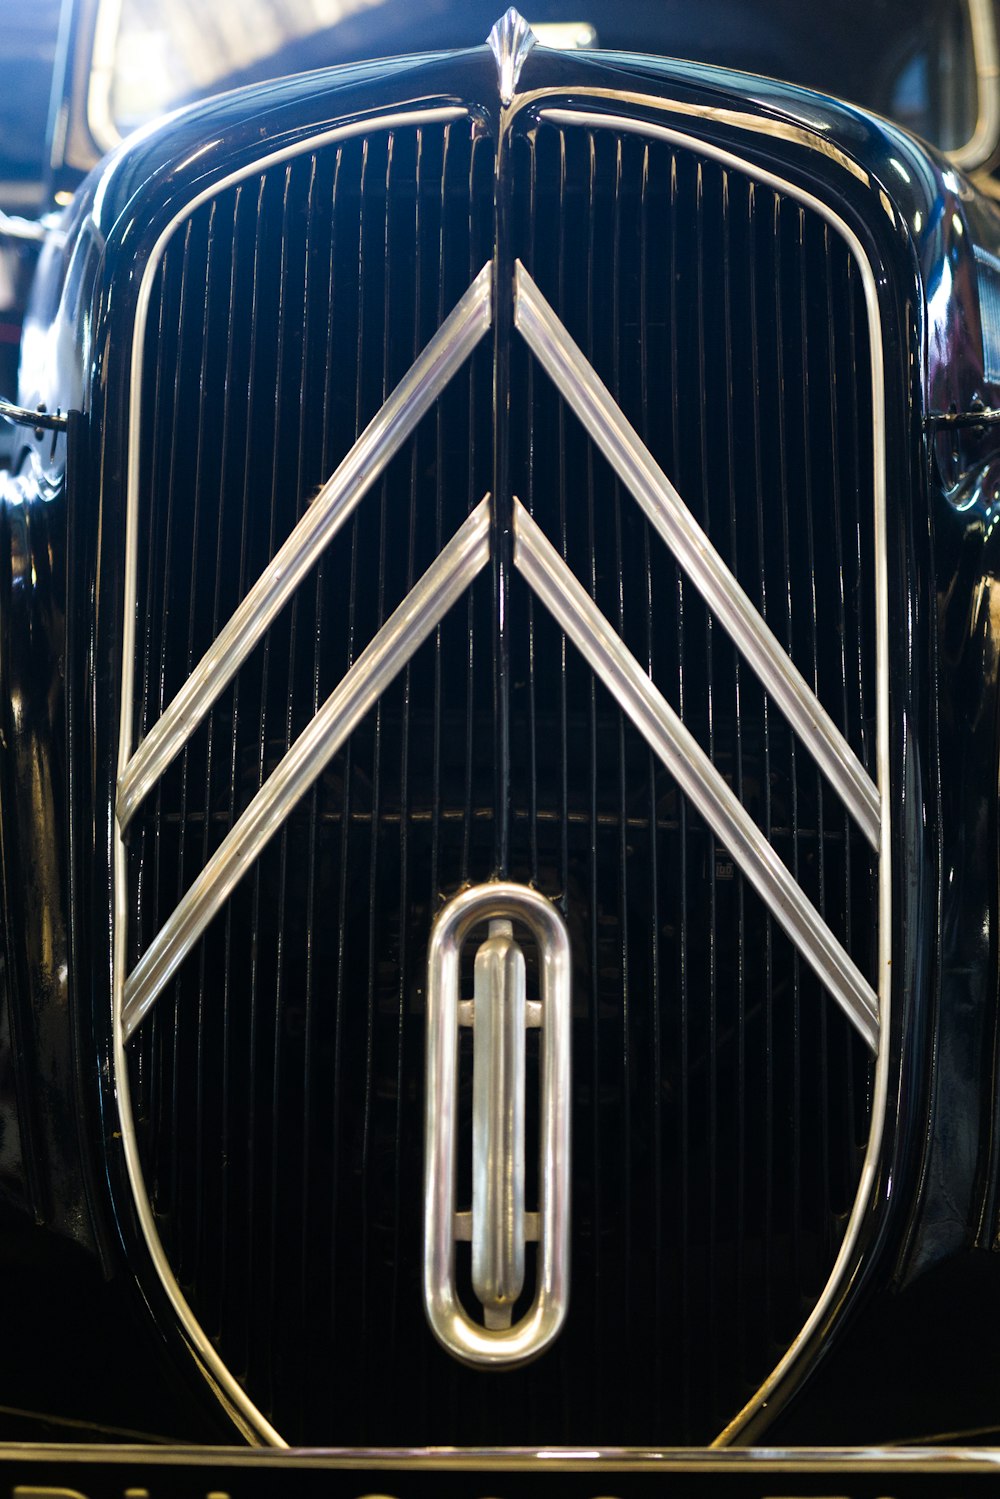 a close up of a car's grill